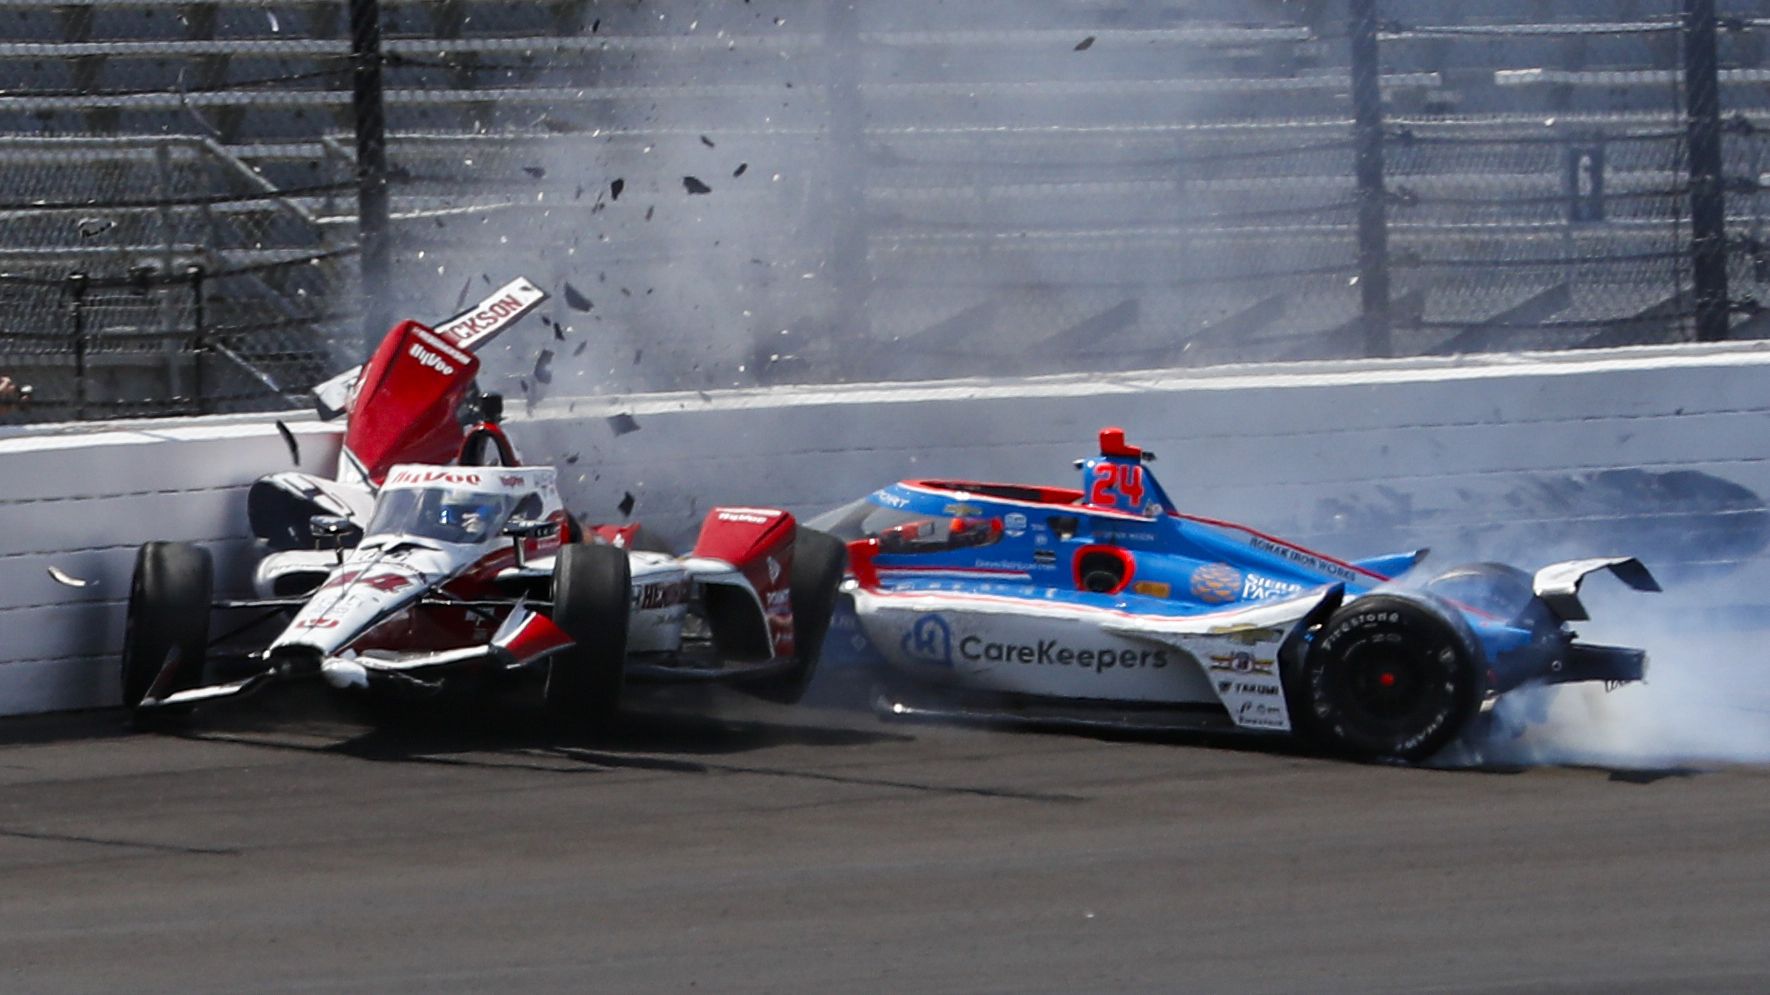 Katherine Legge (left) and Stefan Wilson crash in the first turn during practice for the Indianapolis 500.